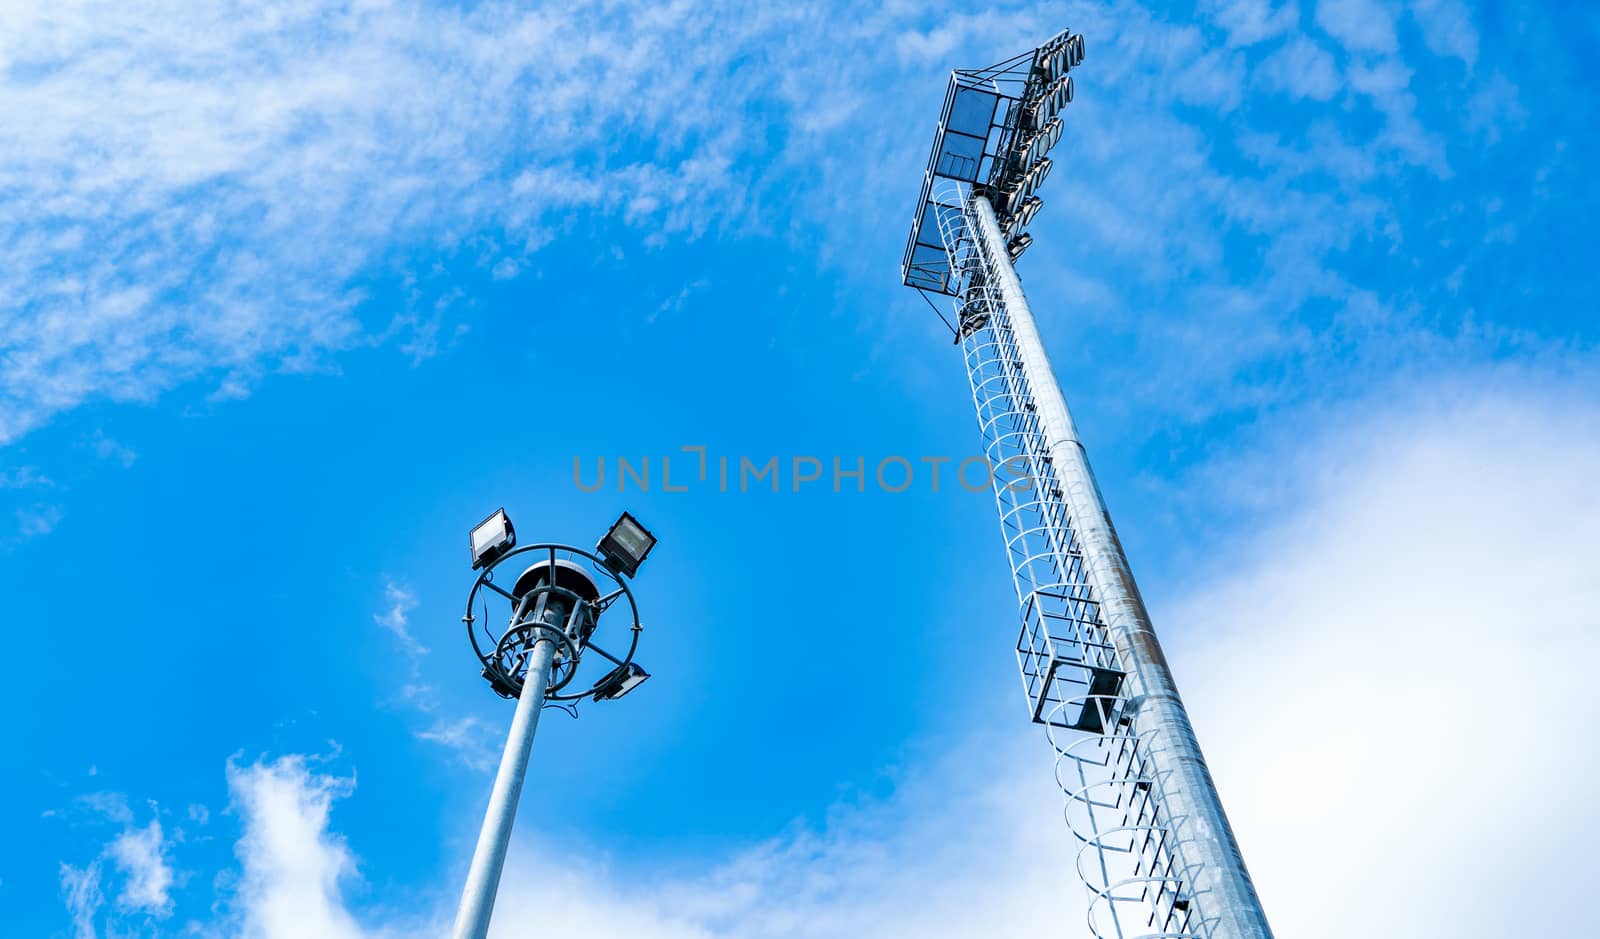 Sport lights of the stadium on beautiful blue sky and white clouds. Copy space